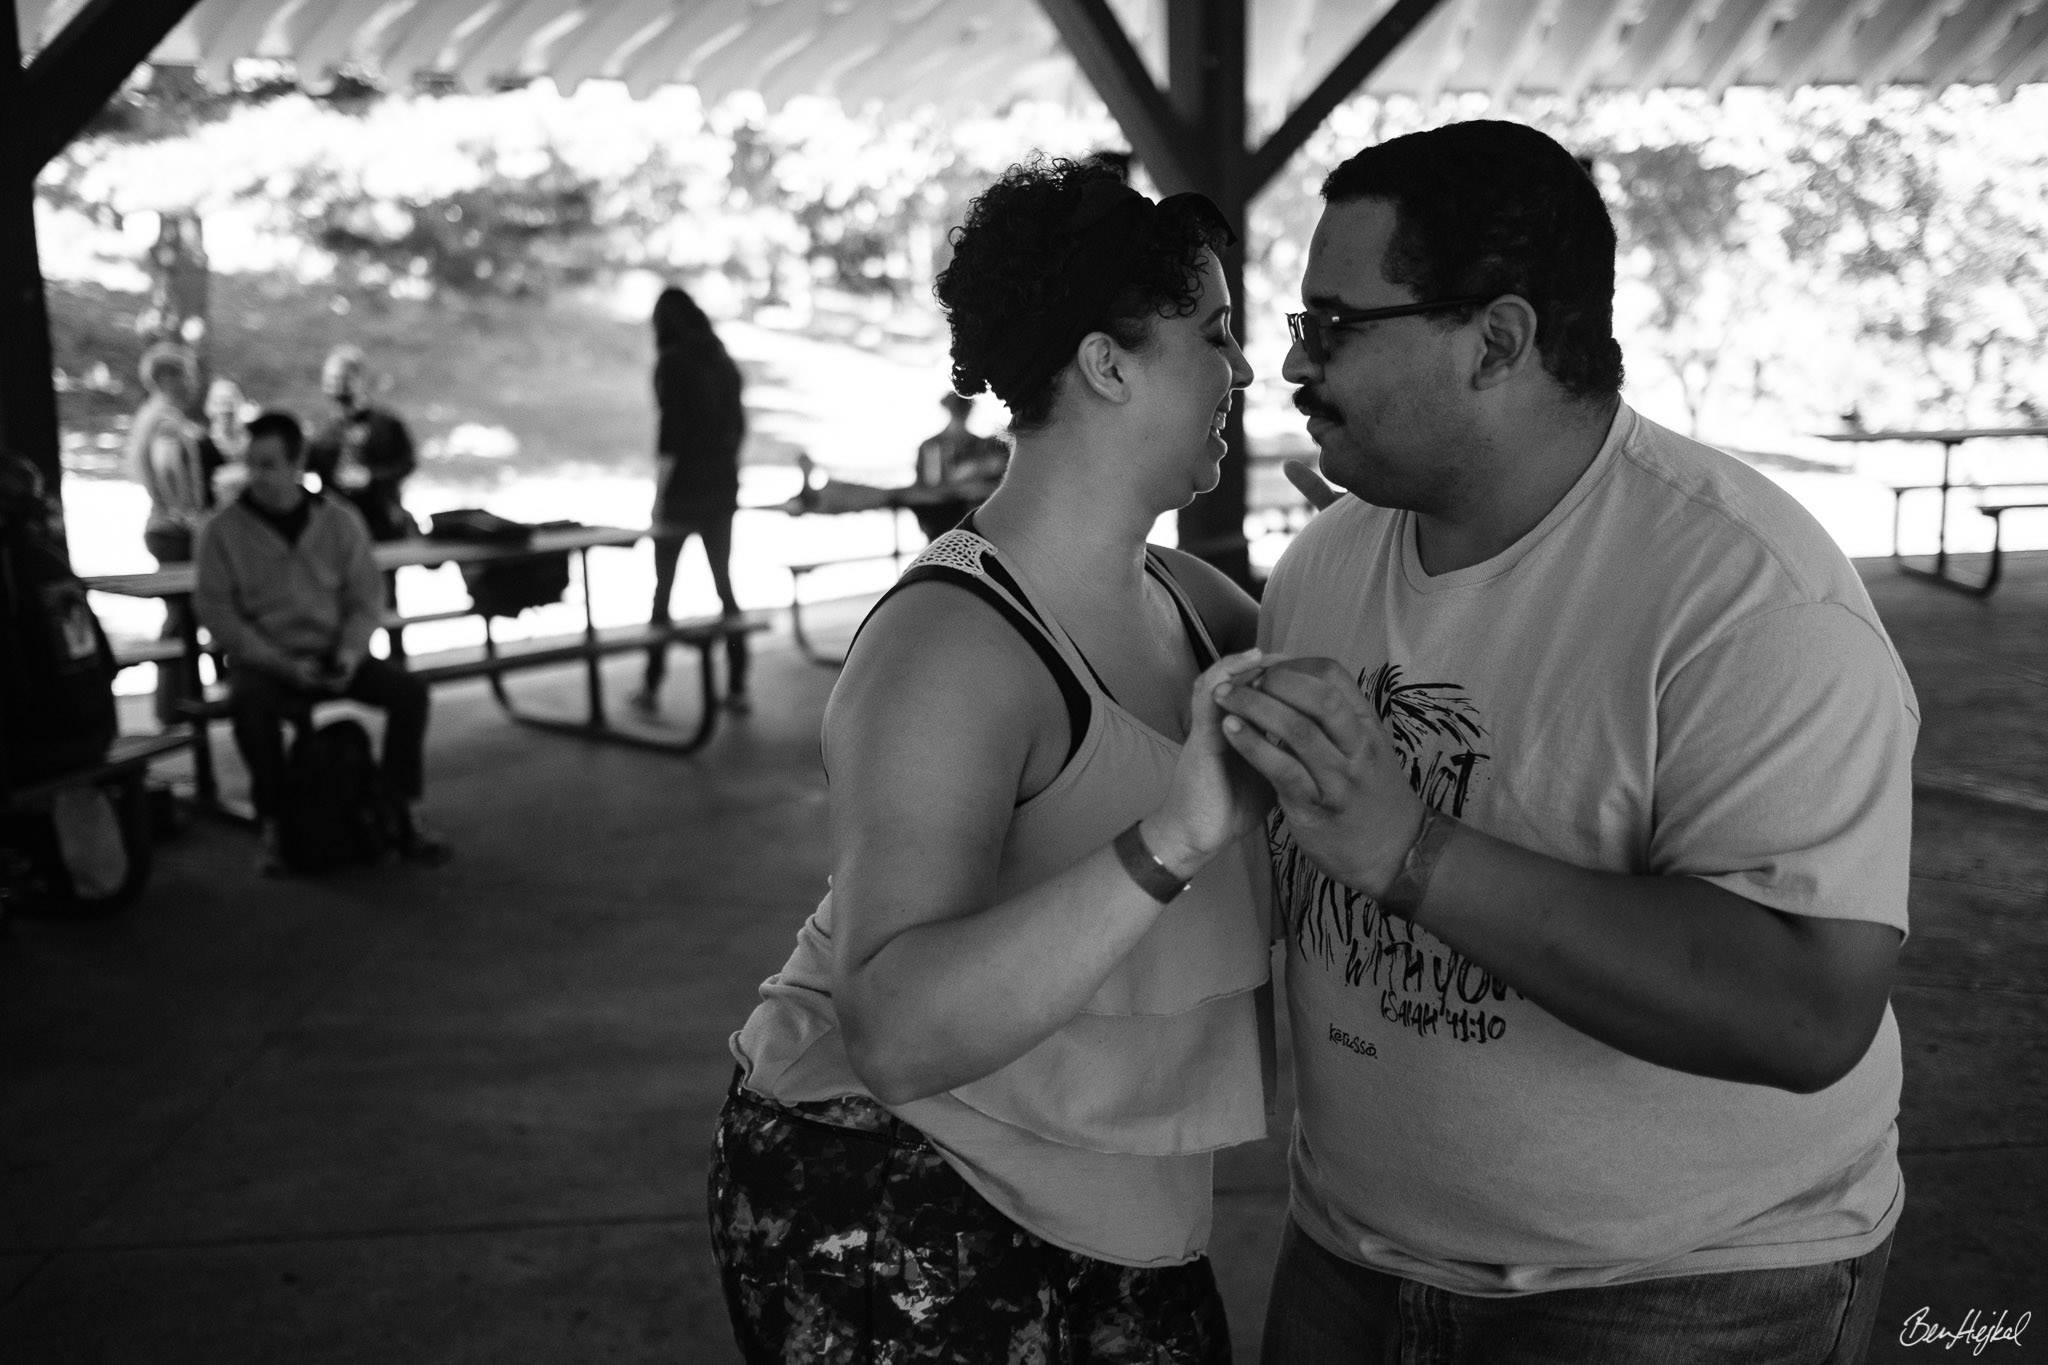 Two fat Black people dance in close embrace under a shady picnic pavilion at a park. The masc person leading has a mustache and glasses and is wearing a tshirt and jeans. The femme person following is smiling, wears a flowing top and leggings.